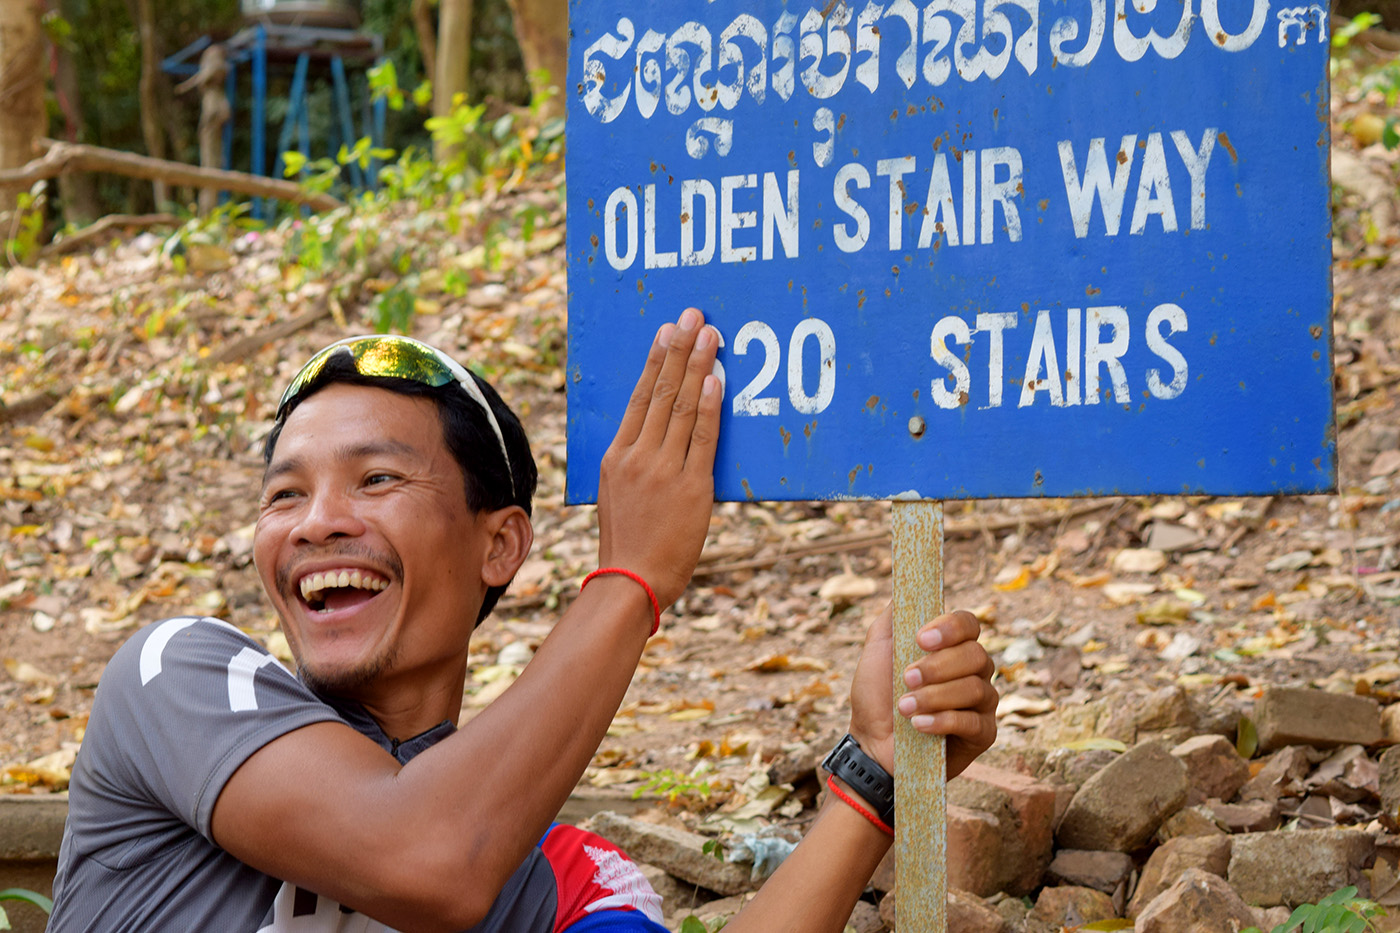 Tour guide laughing stairway sign